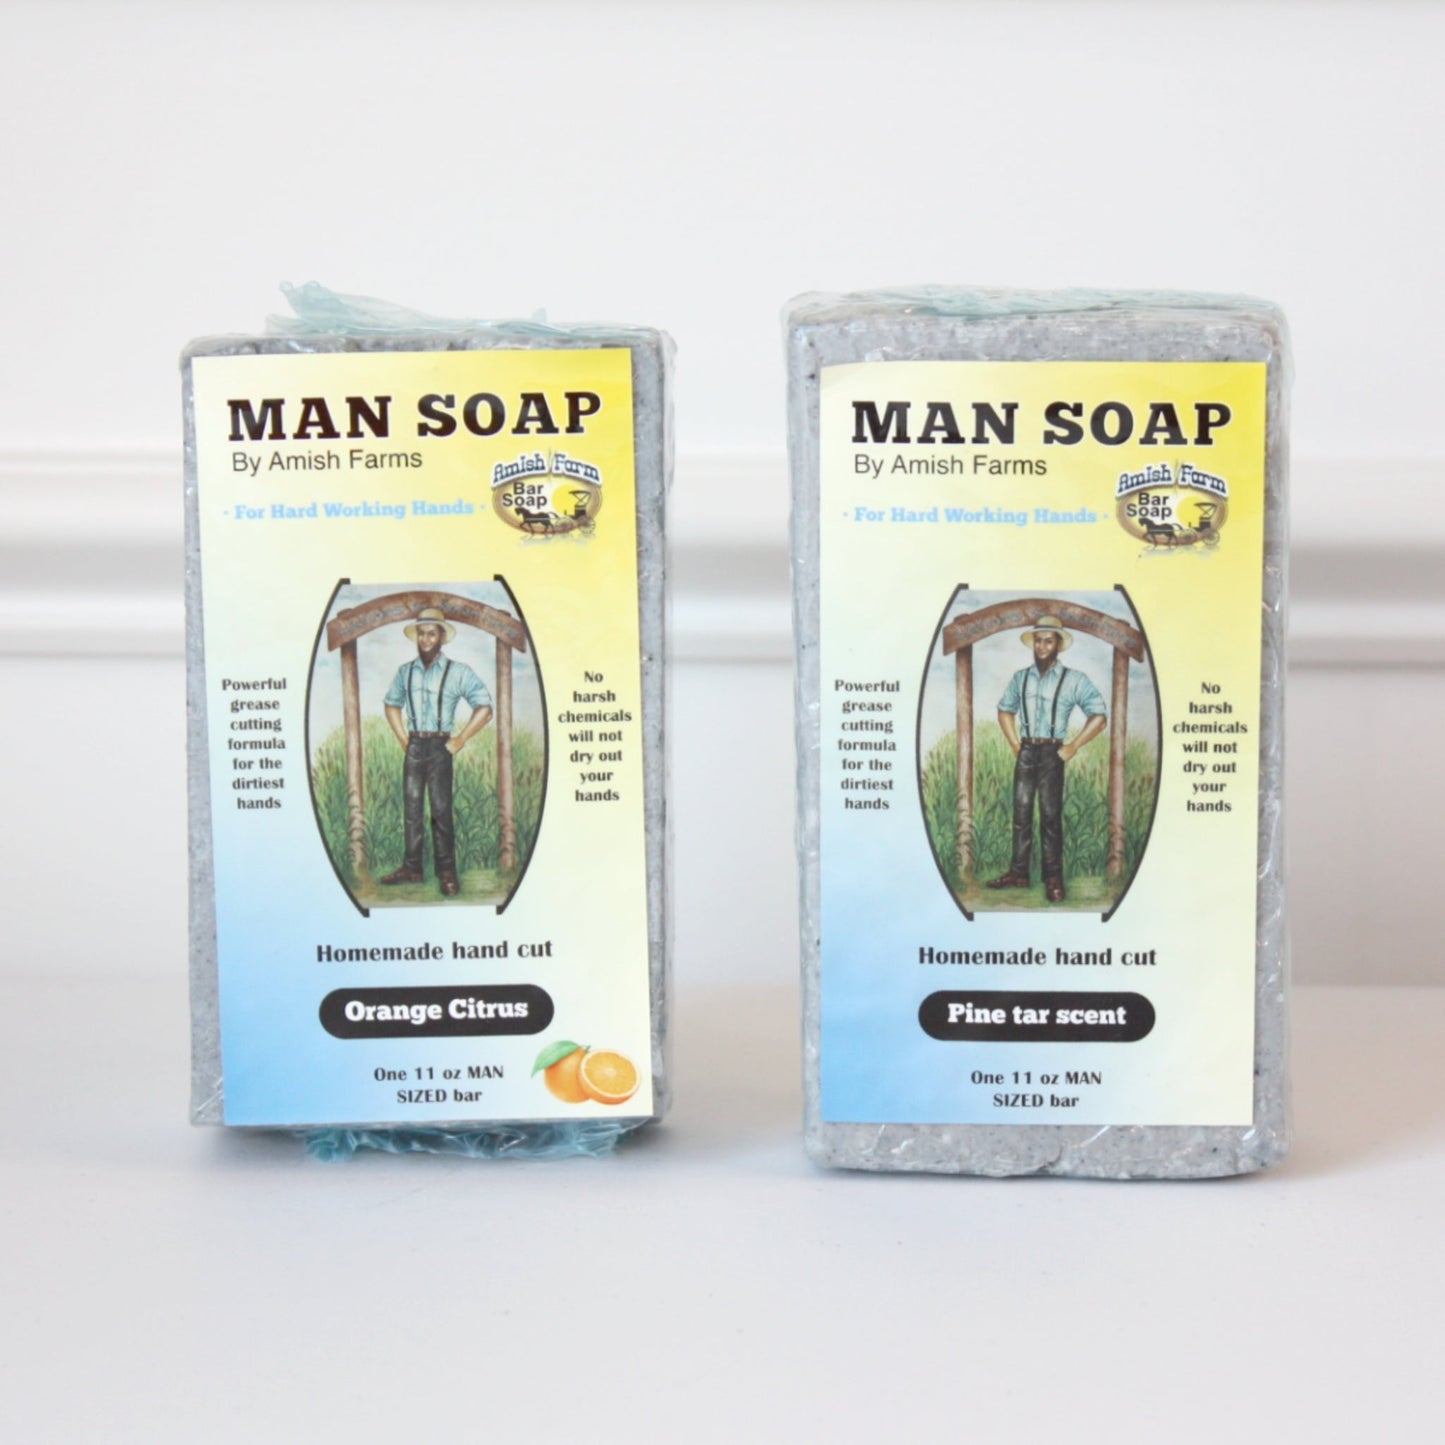 Amish Farms Man Soap - Made in the USA